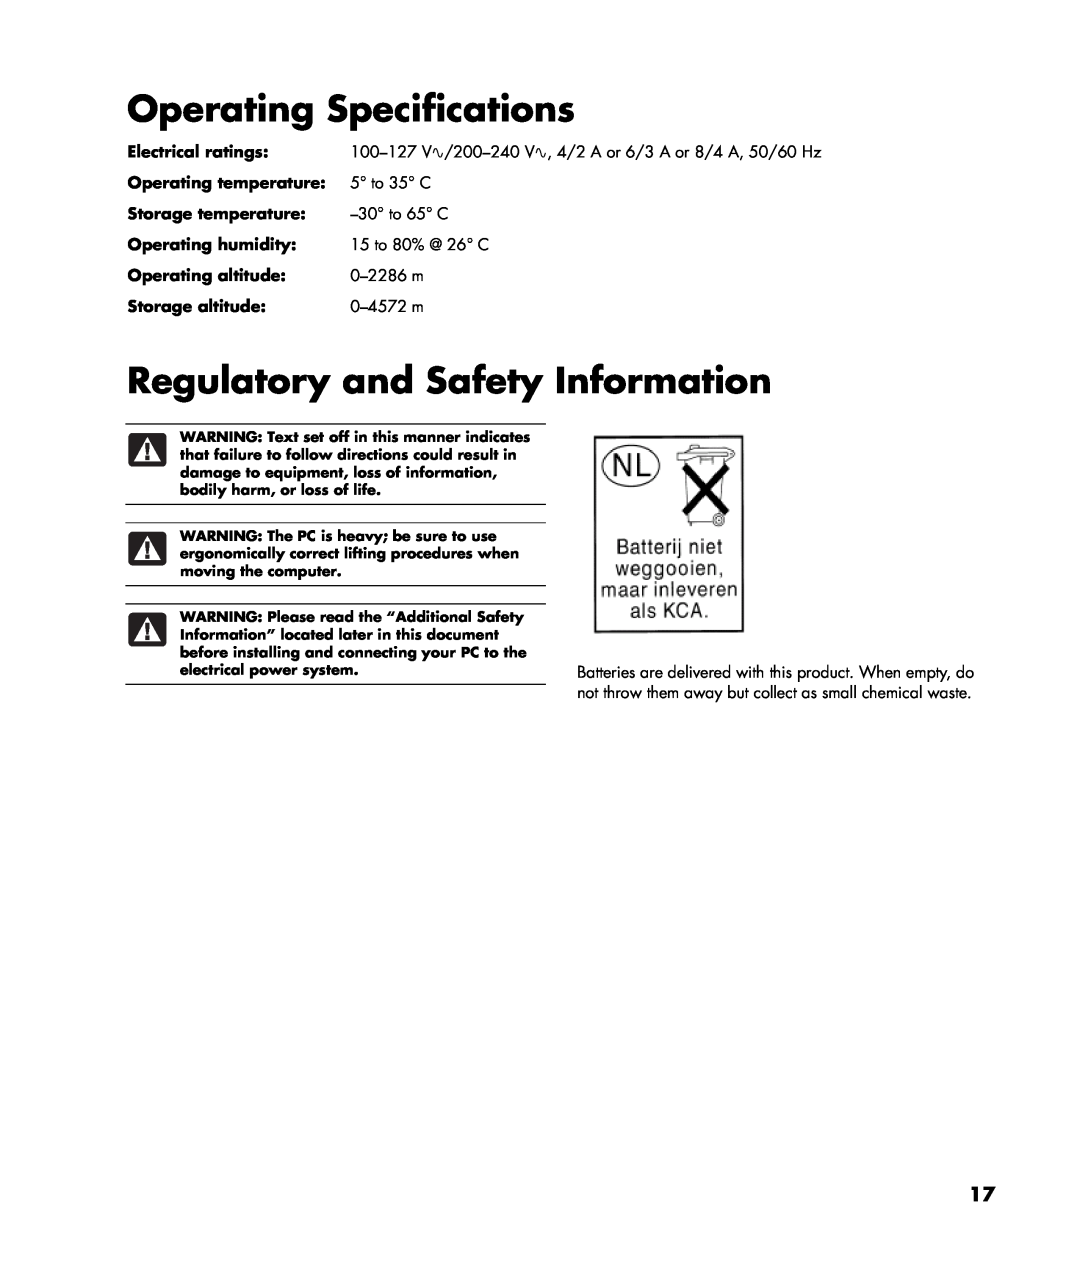 Compaq GX5000T Operating Specifications, Regulatory and Safety Information, Electrical ratings, Operating temperature 